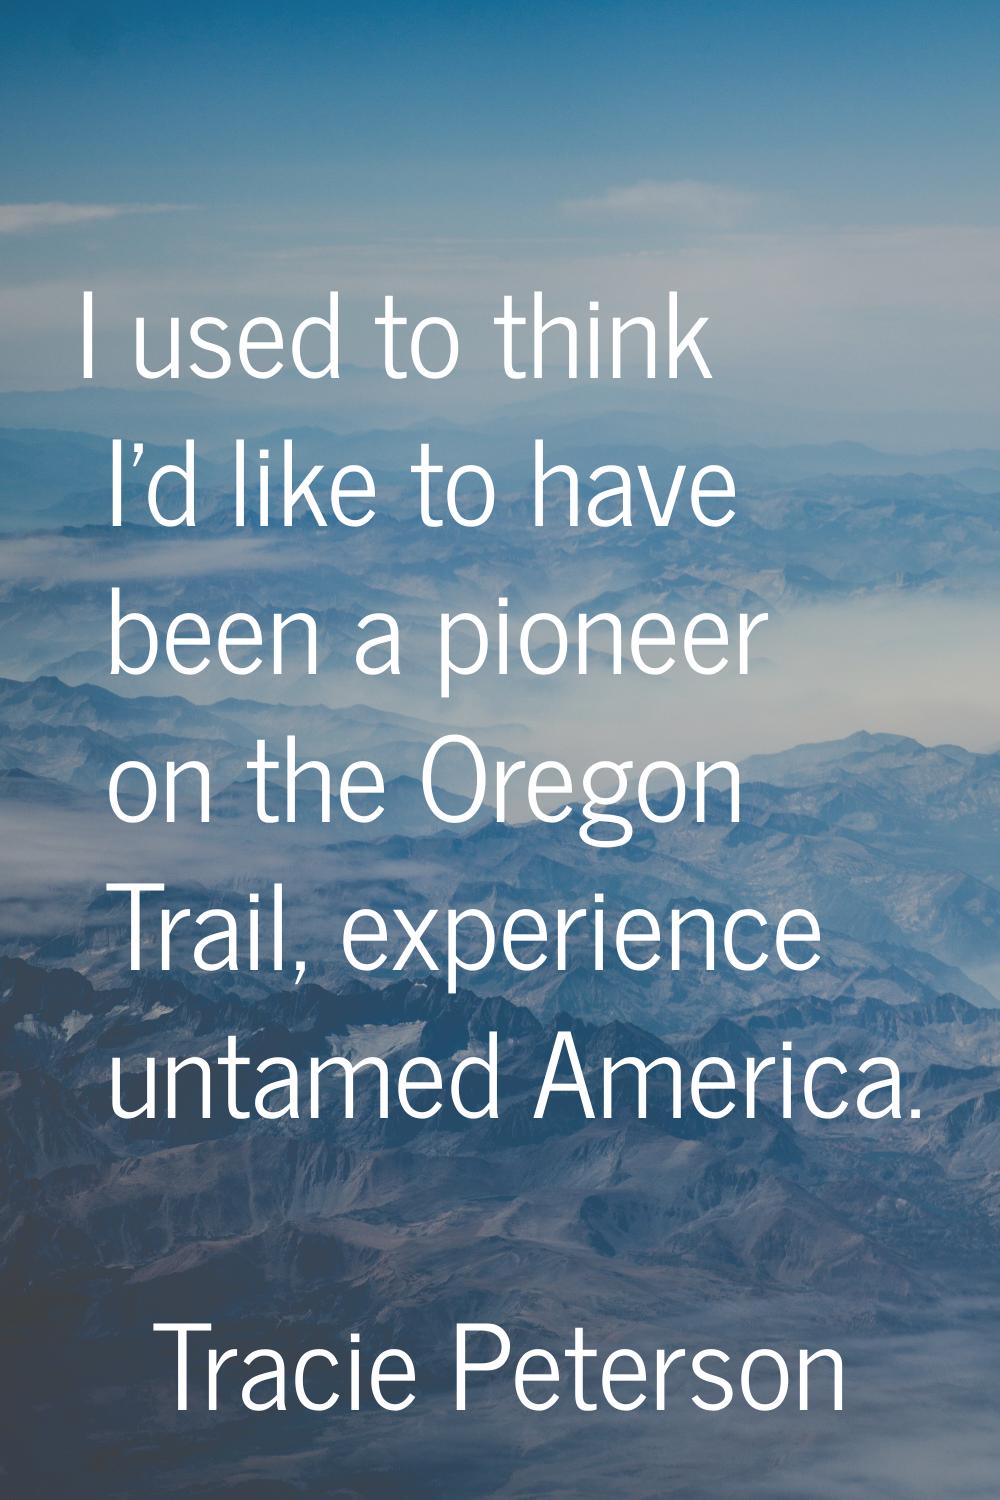 I used to think I'd like to have been a pioneer on the Oregon Trail, experience untamed America.